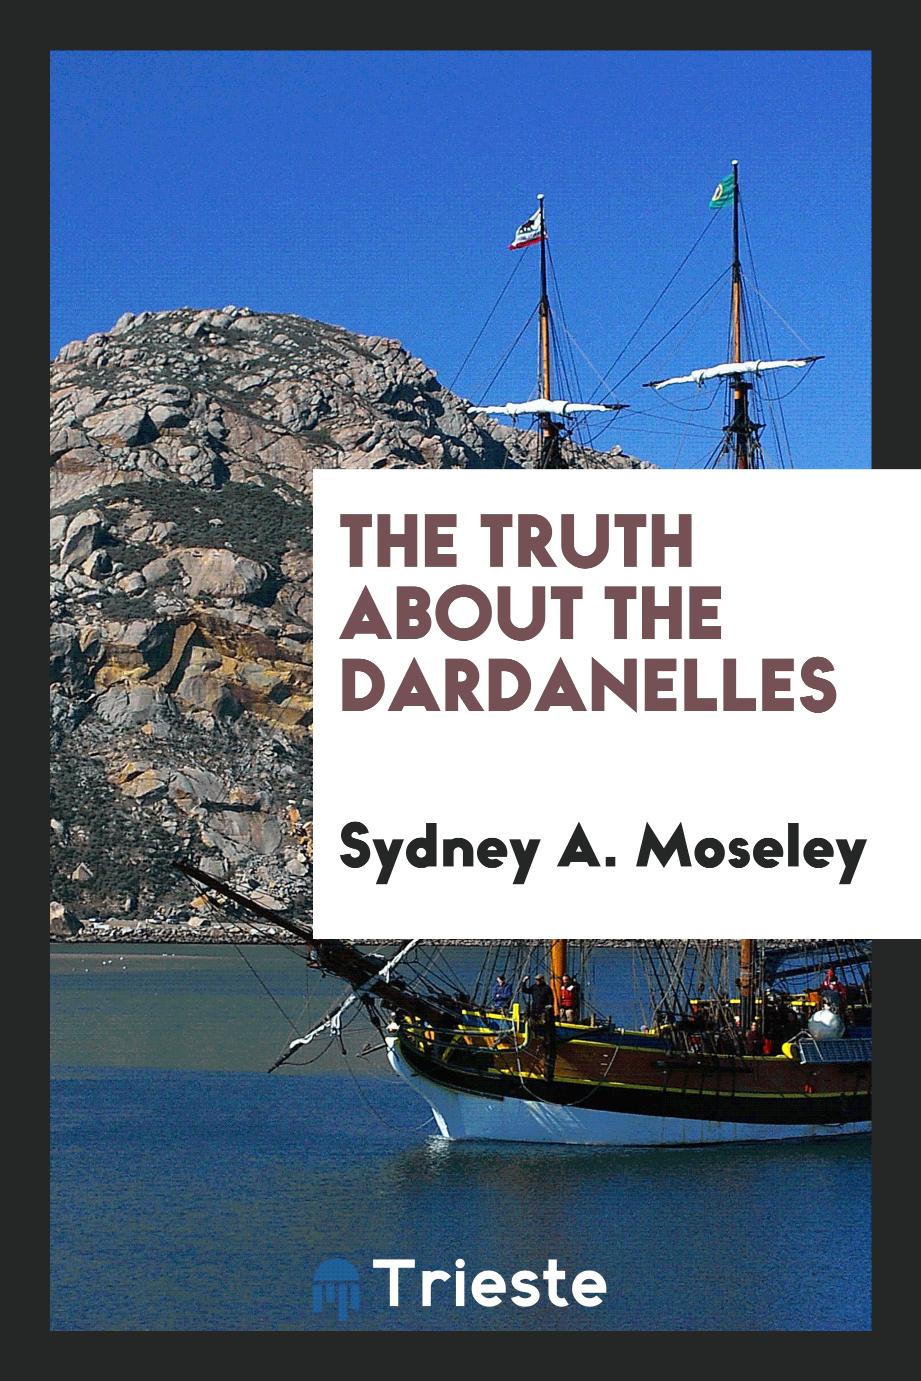 The truth about the Dardanelles